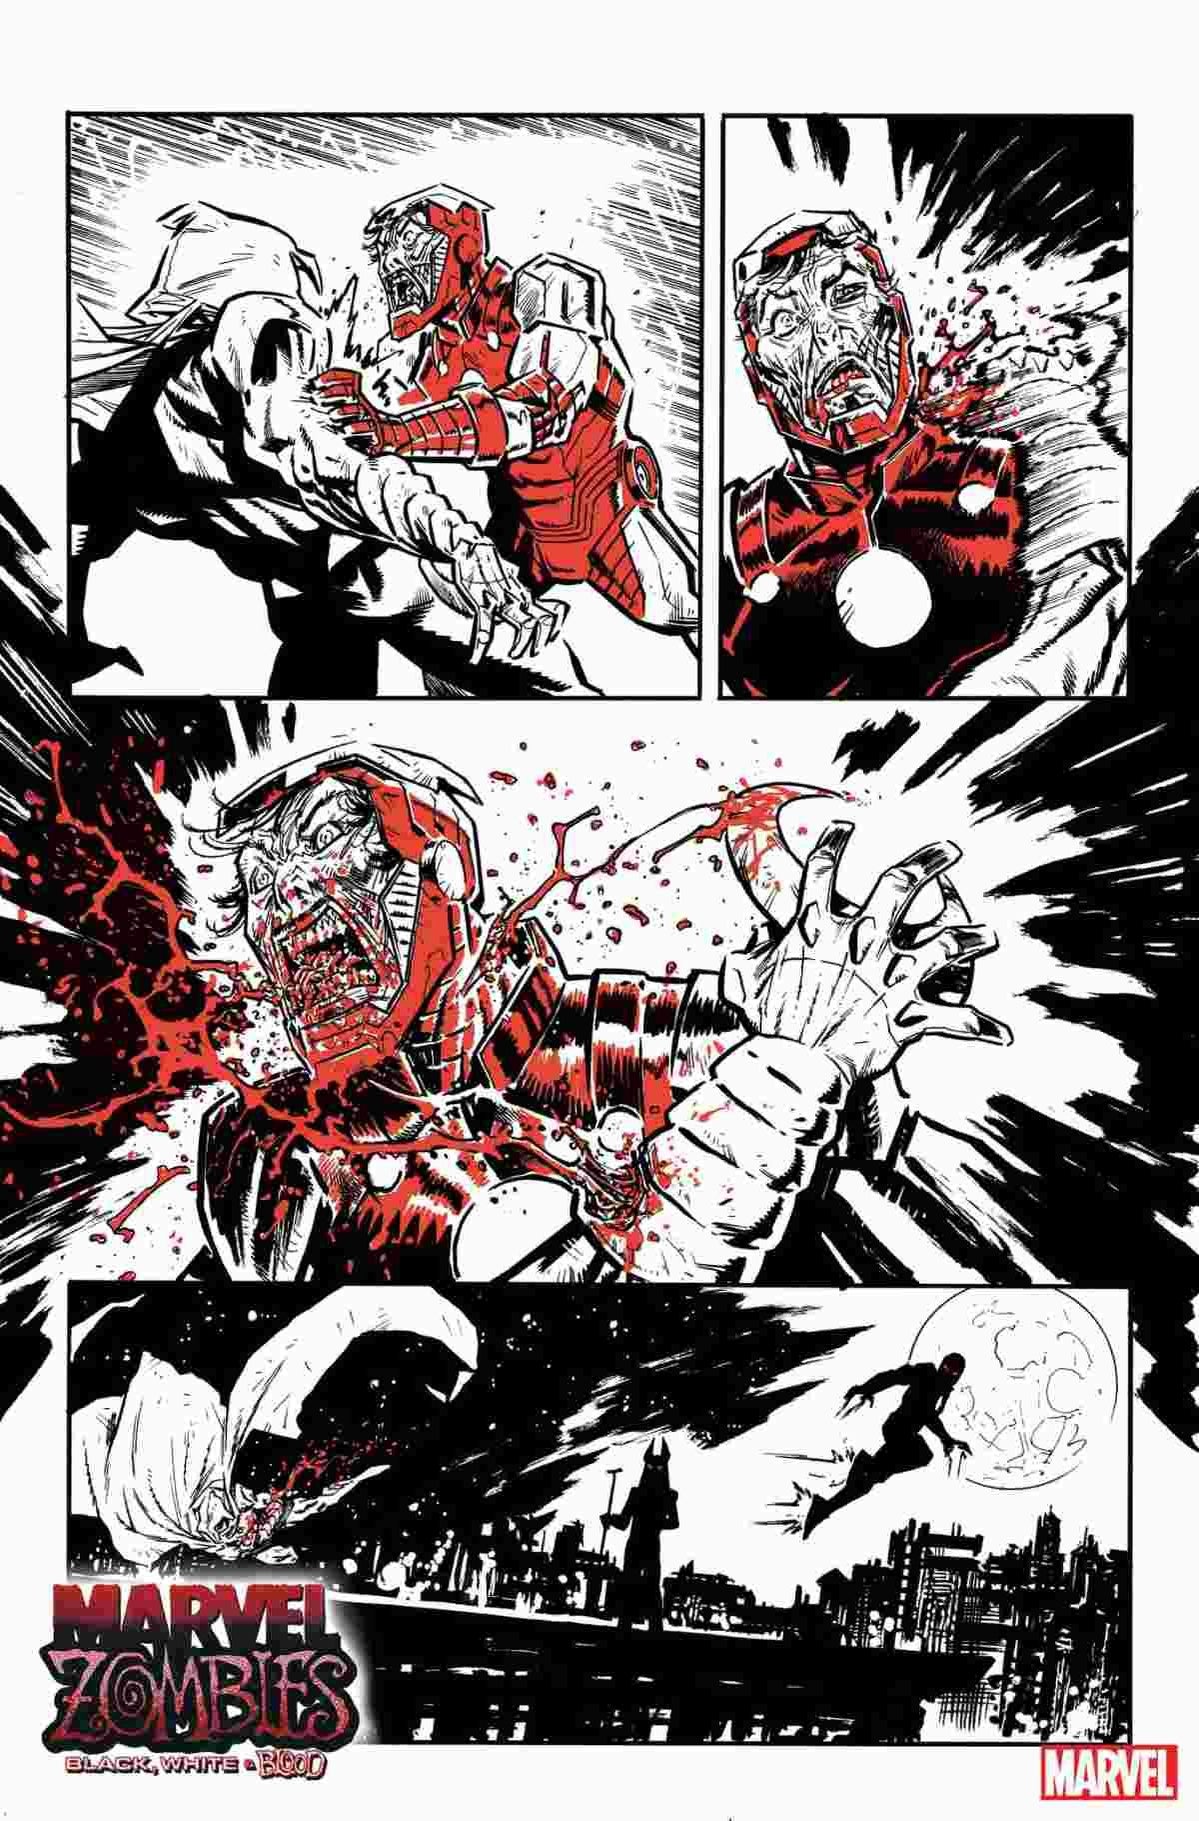 marvel-zombies-black-white-and-blood-preview-003.jpg